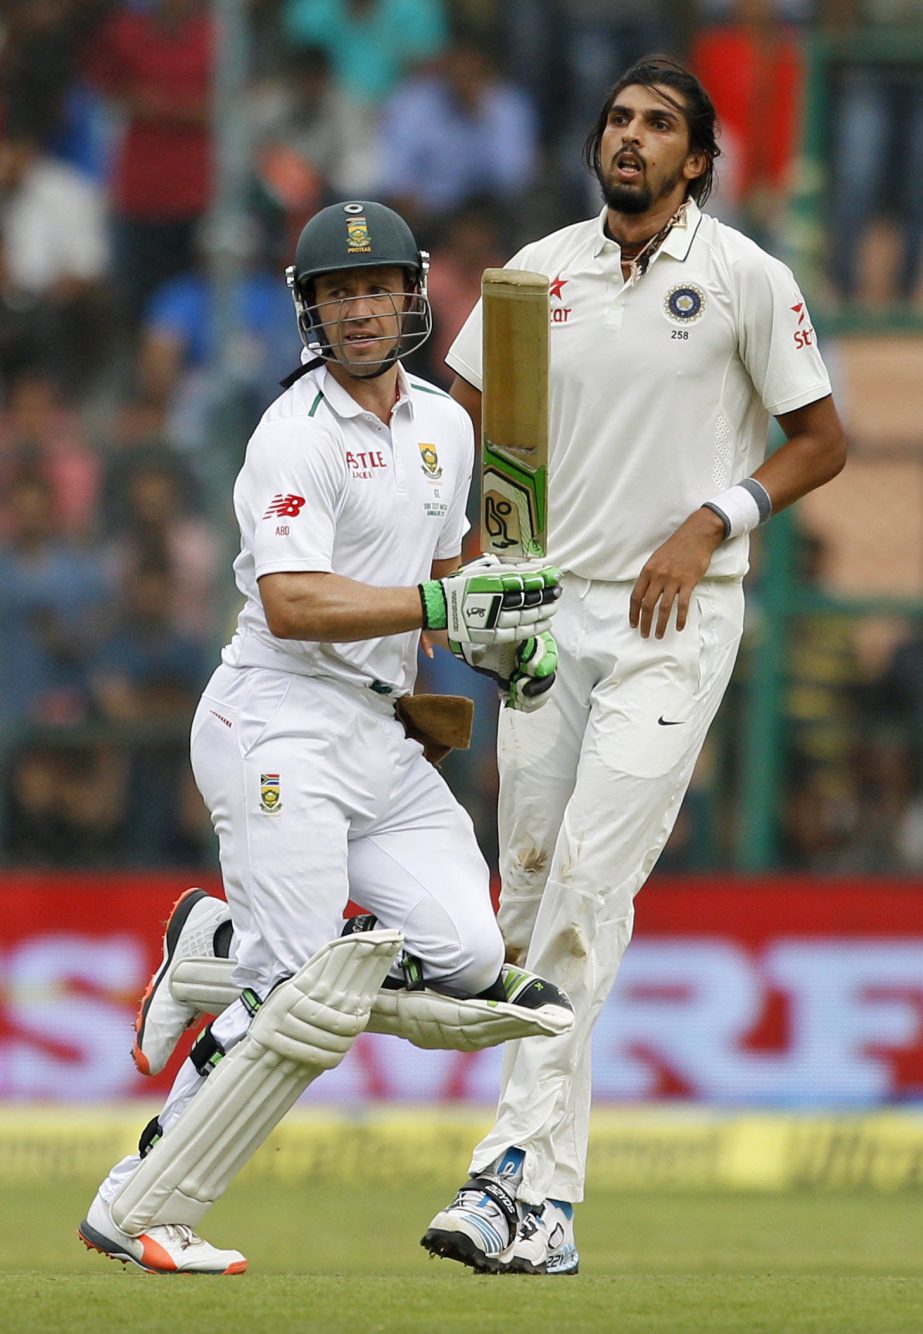 South Africa's AB de Villiers (left) and India's Ishant Sharma watch the ball after Villiers played a shot during the first day of their second cricket Test match in Bangalore, India on Saturday.